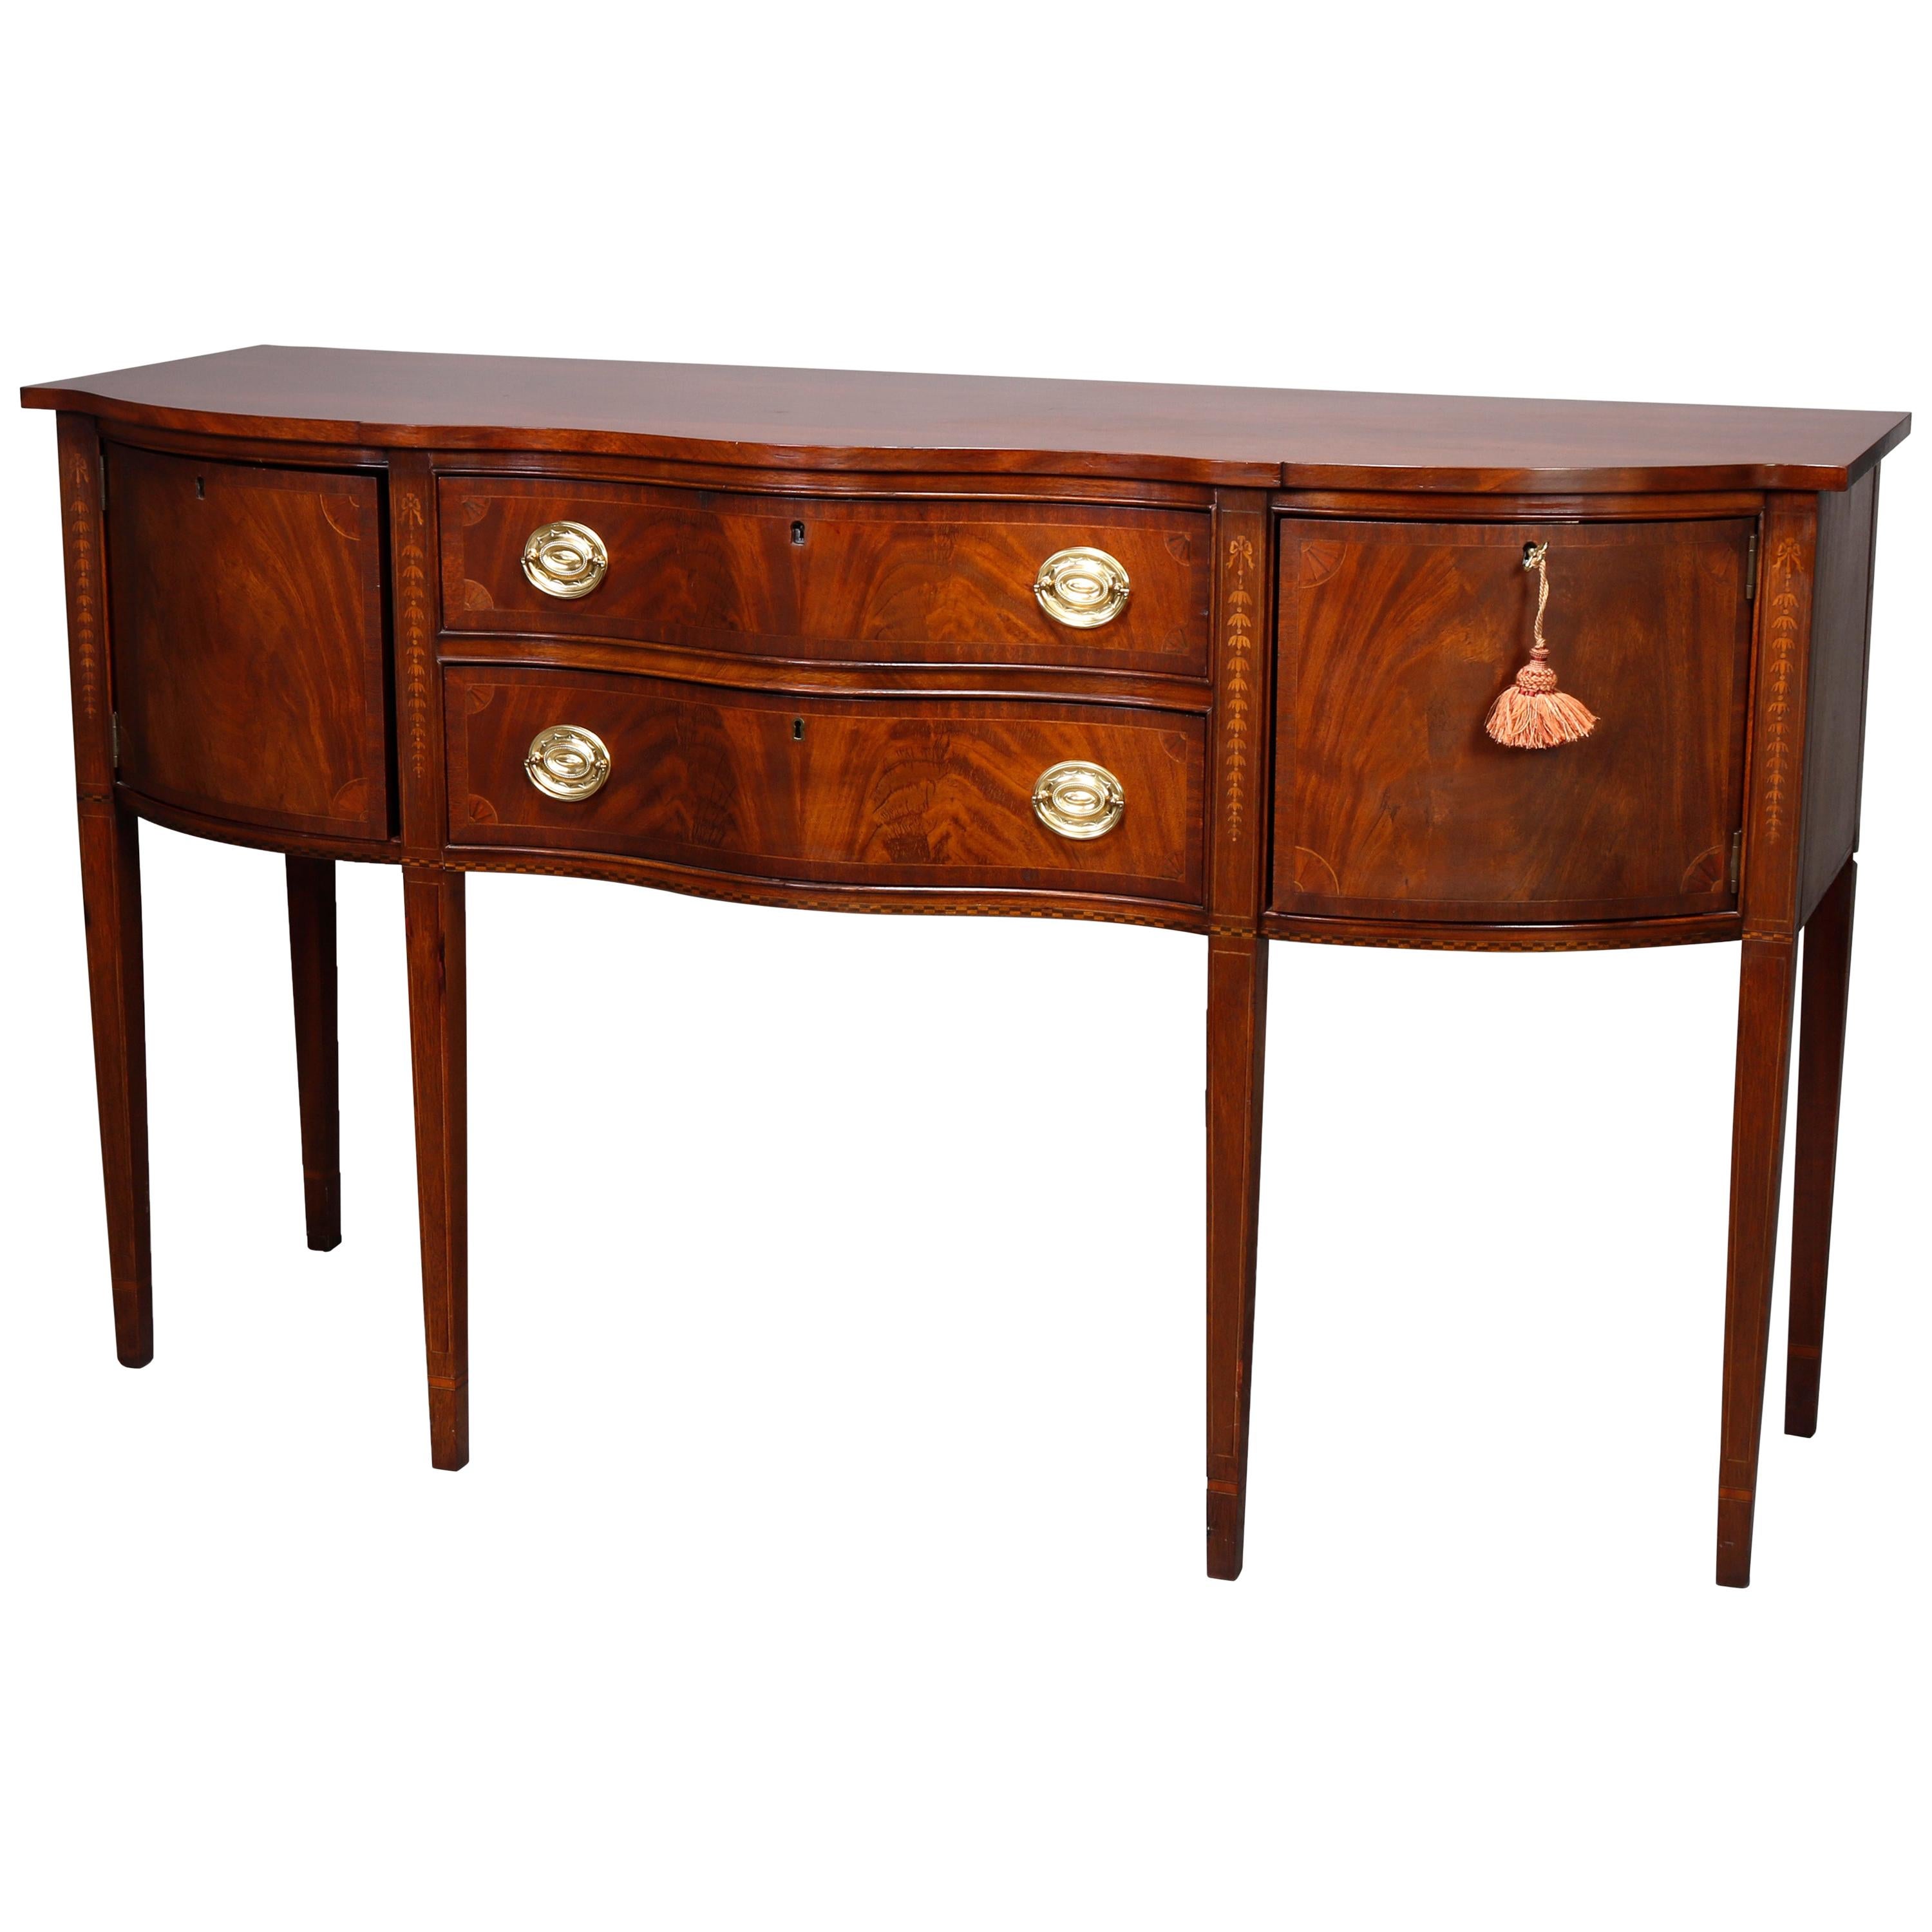 Council Craftsman Federal Style Inlaid Serpentine Flame Mahogany Sideboard